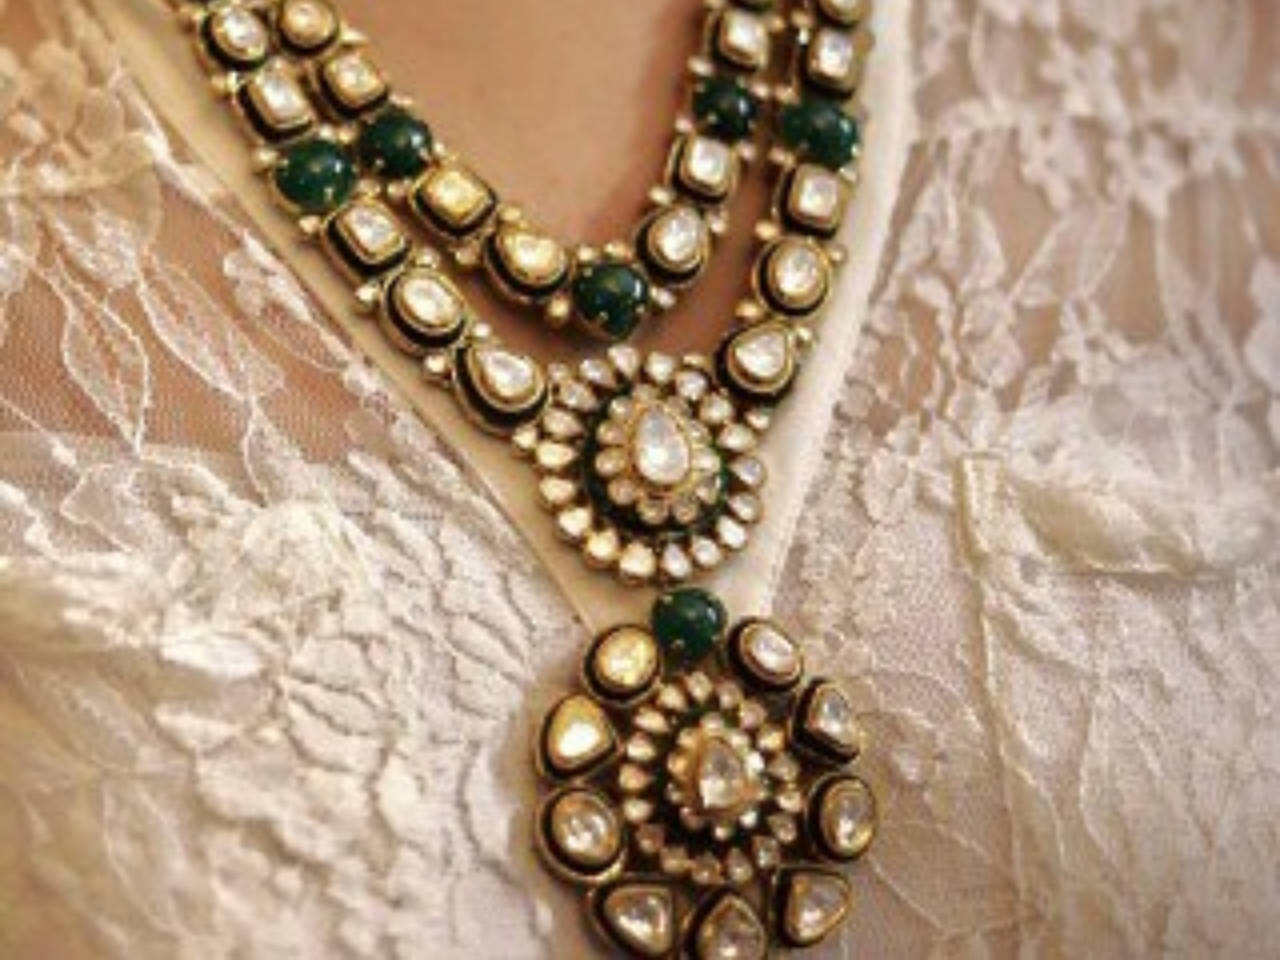 Antique Jewellery Ideas For Bride: How to be a vintage bride with ...